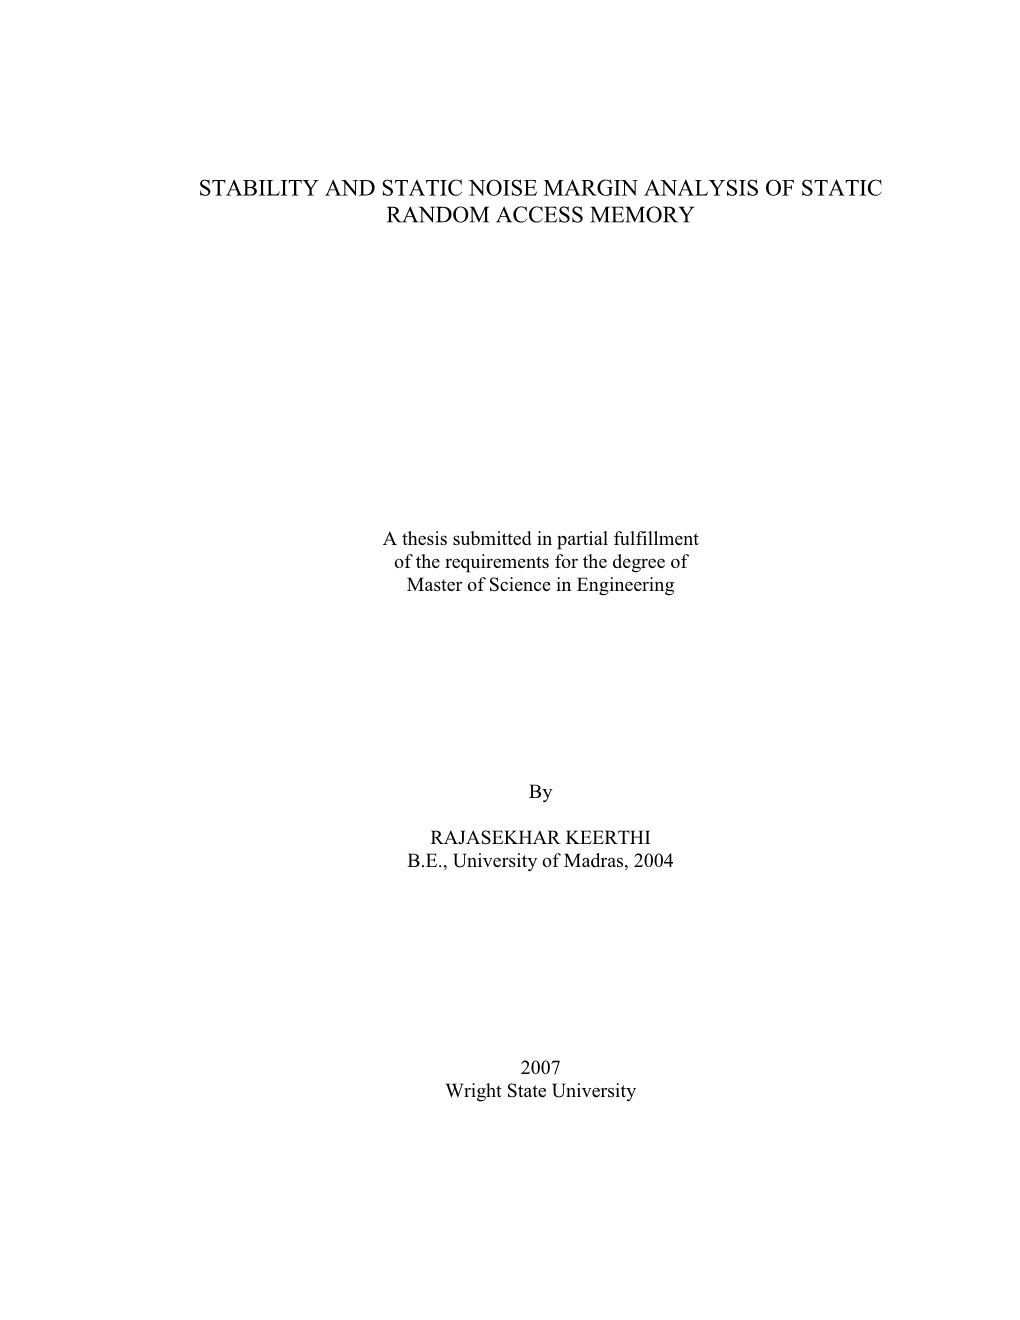 Stability and Static Noise Margin Analysis of Static Random Access Memory